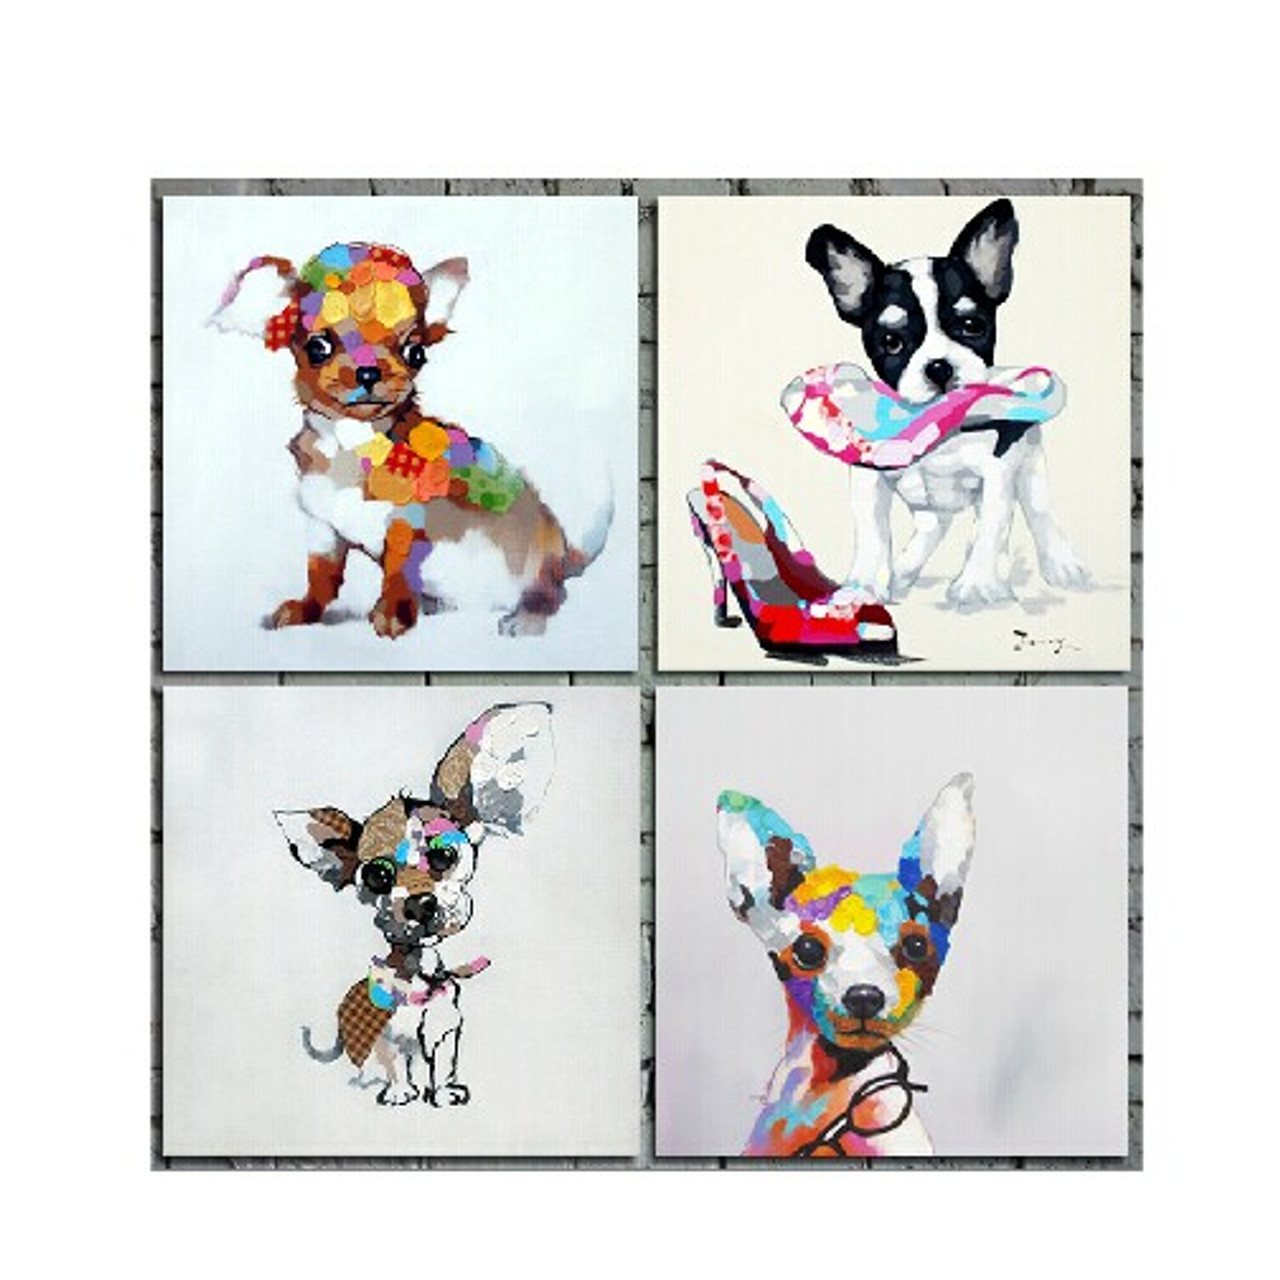 Buy Dog Spreads 2 by Community Artists Group@ Rs. 8890. Code:RTCSK_71_4848  - Shop Art Paintings online in India.